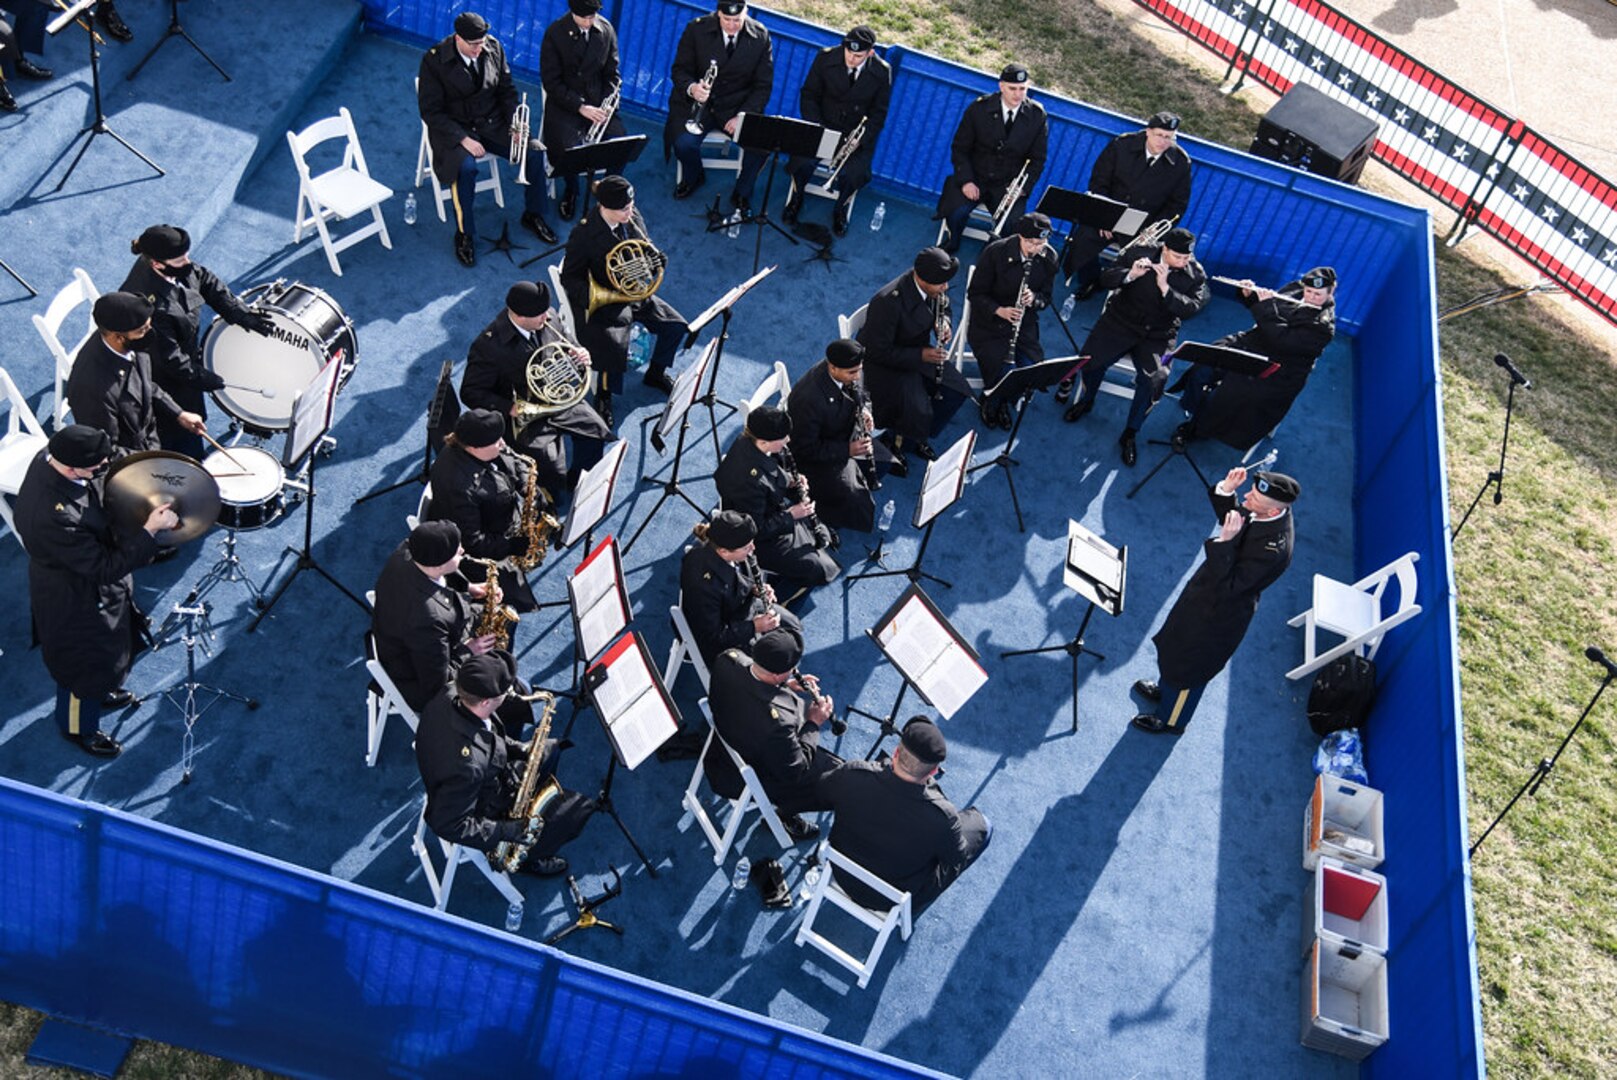 Virginia Guard Public Affairs 29th Division Band plays music for 74th Governor's Inauguration